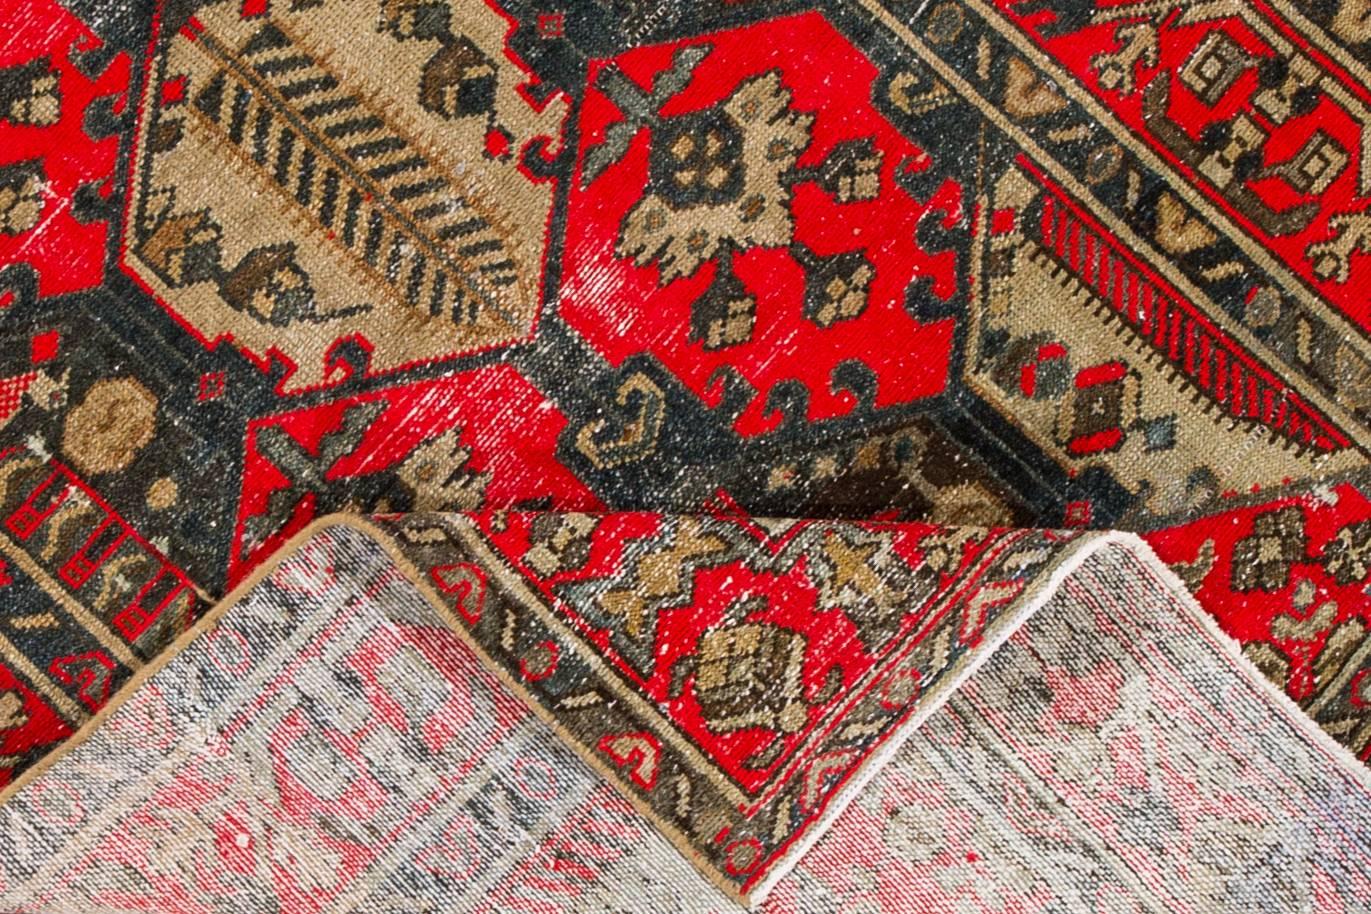 1930s vintage Persian Tabriz carpet. This distressed piece features a bright red field and geometric design in brown, accented with cream tones. Measures: 4 x 6.08.